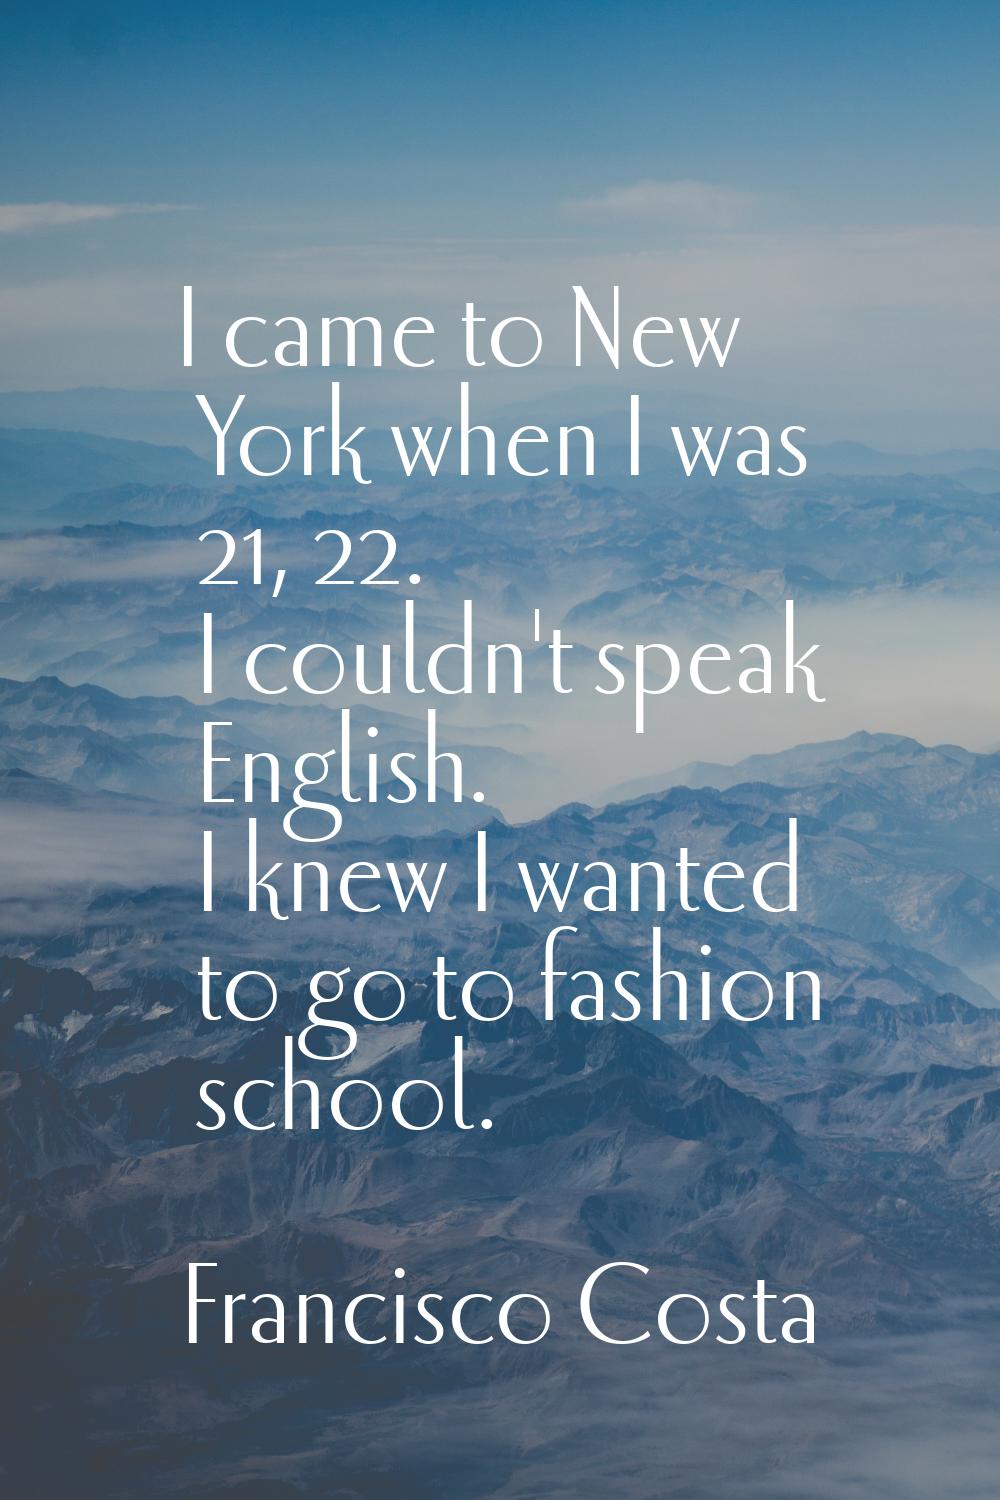 I came to New York when I was 21, 22. I couldn't speak English. I knew I wanted to go to fashion sc